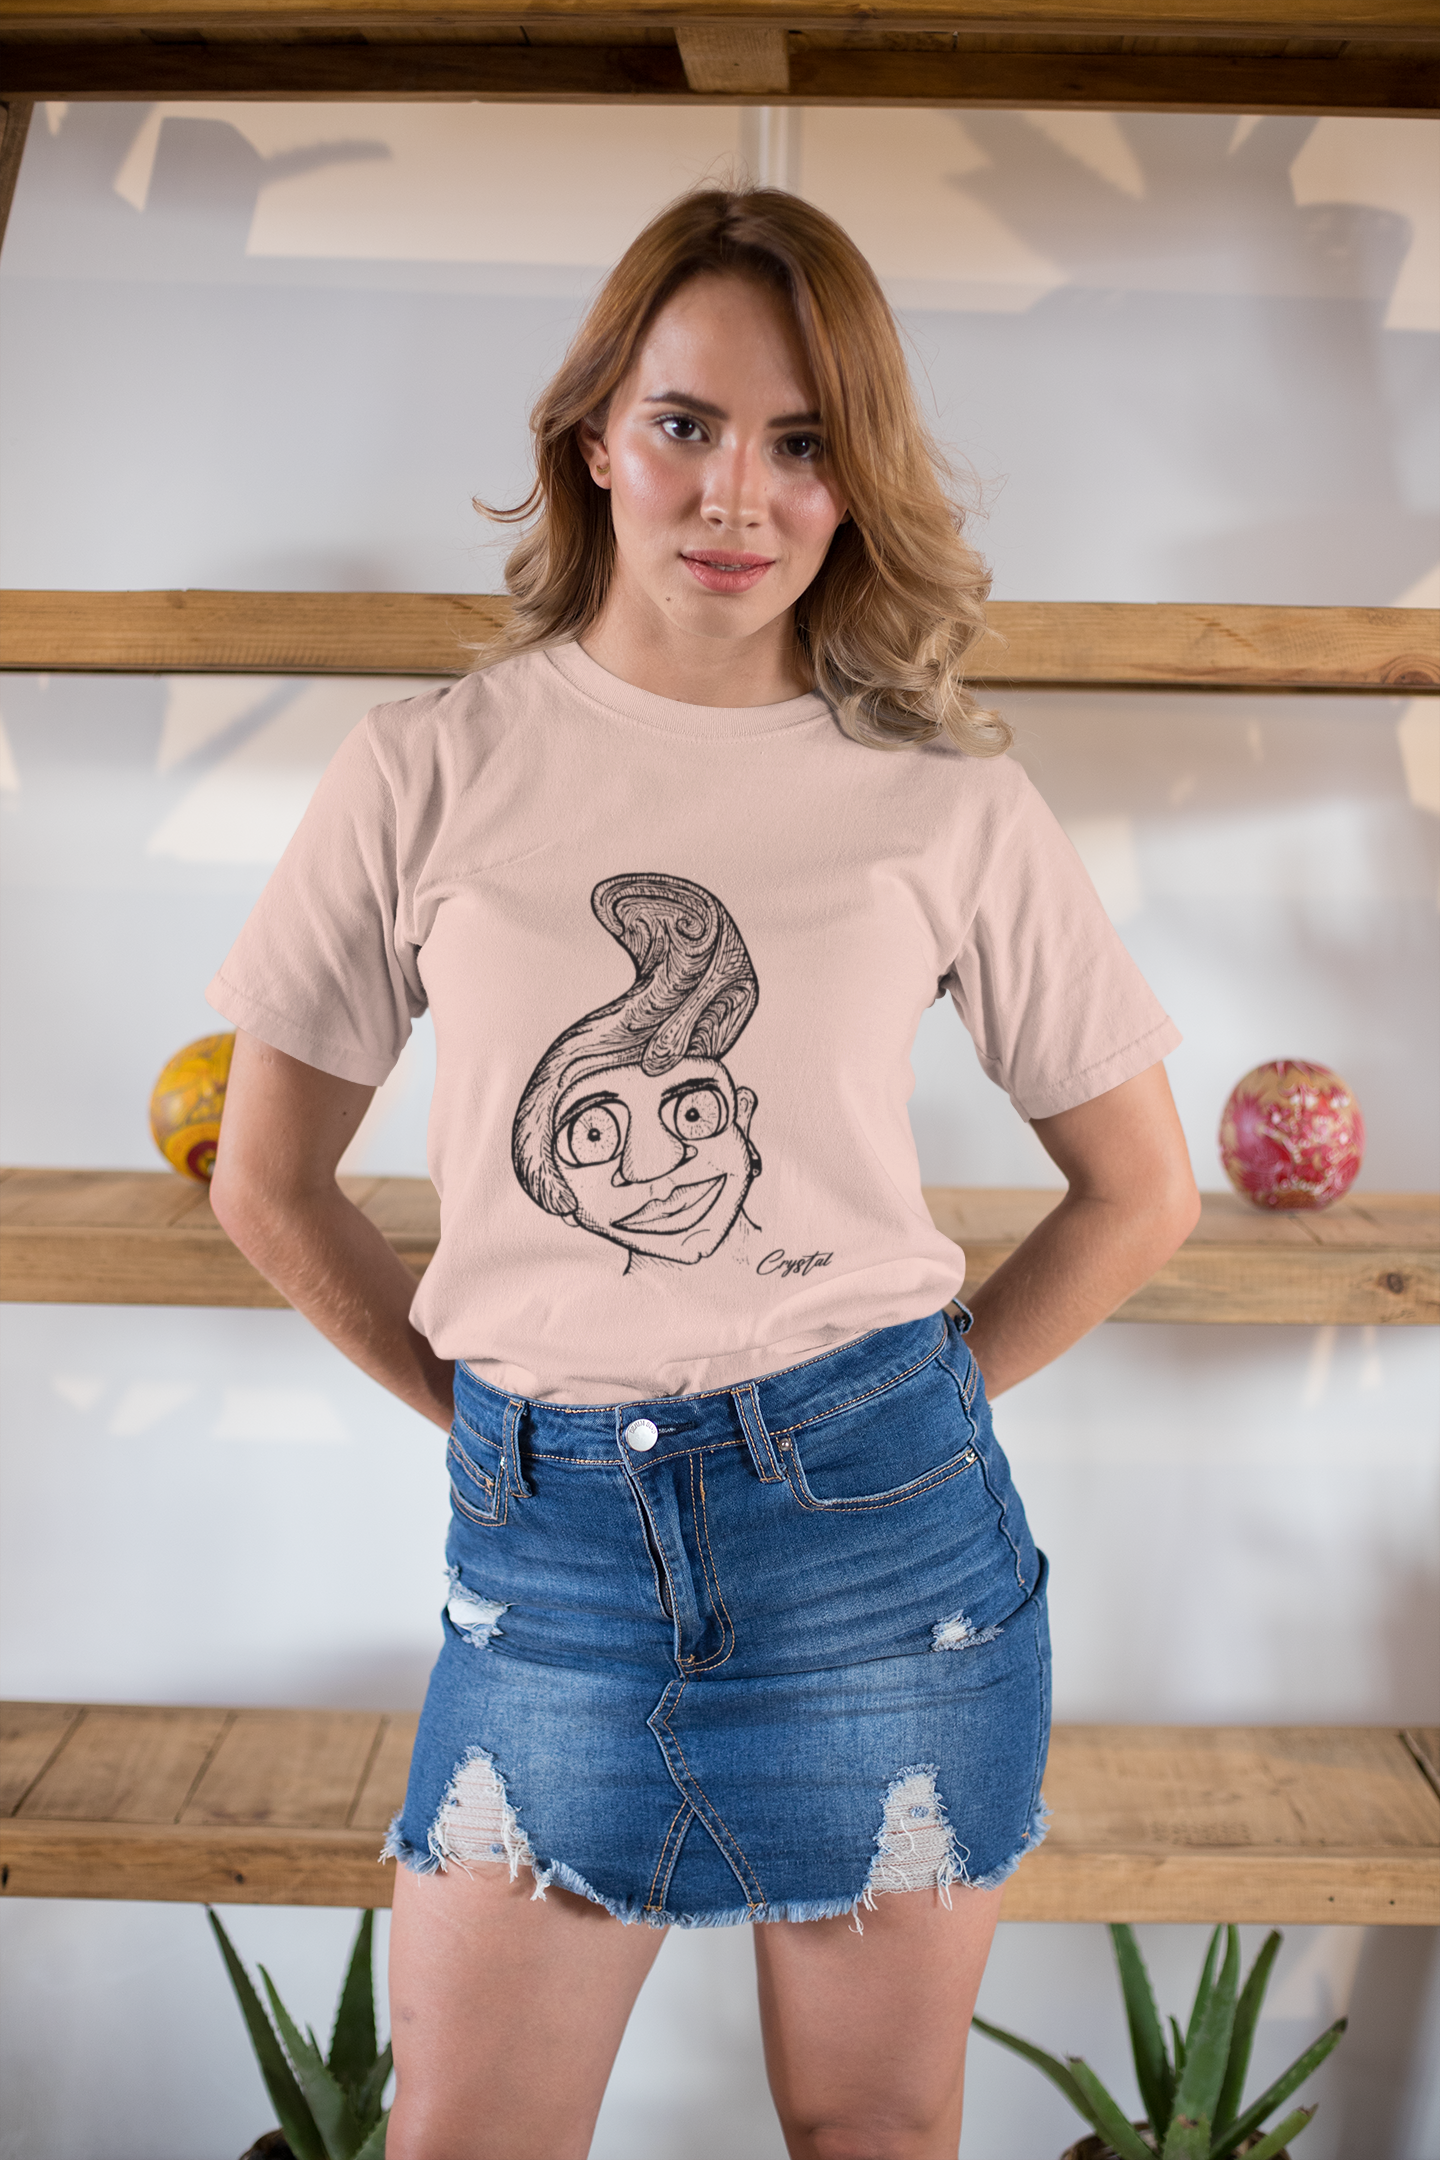 Genderless Person with Great Hair and Big Eyes - Cute & Creepy "Stay Weird" Cartoon Illustration Women's short sleeve t-shirt